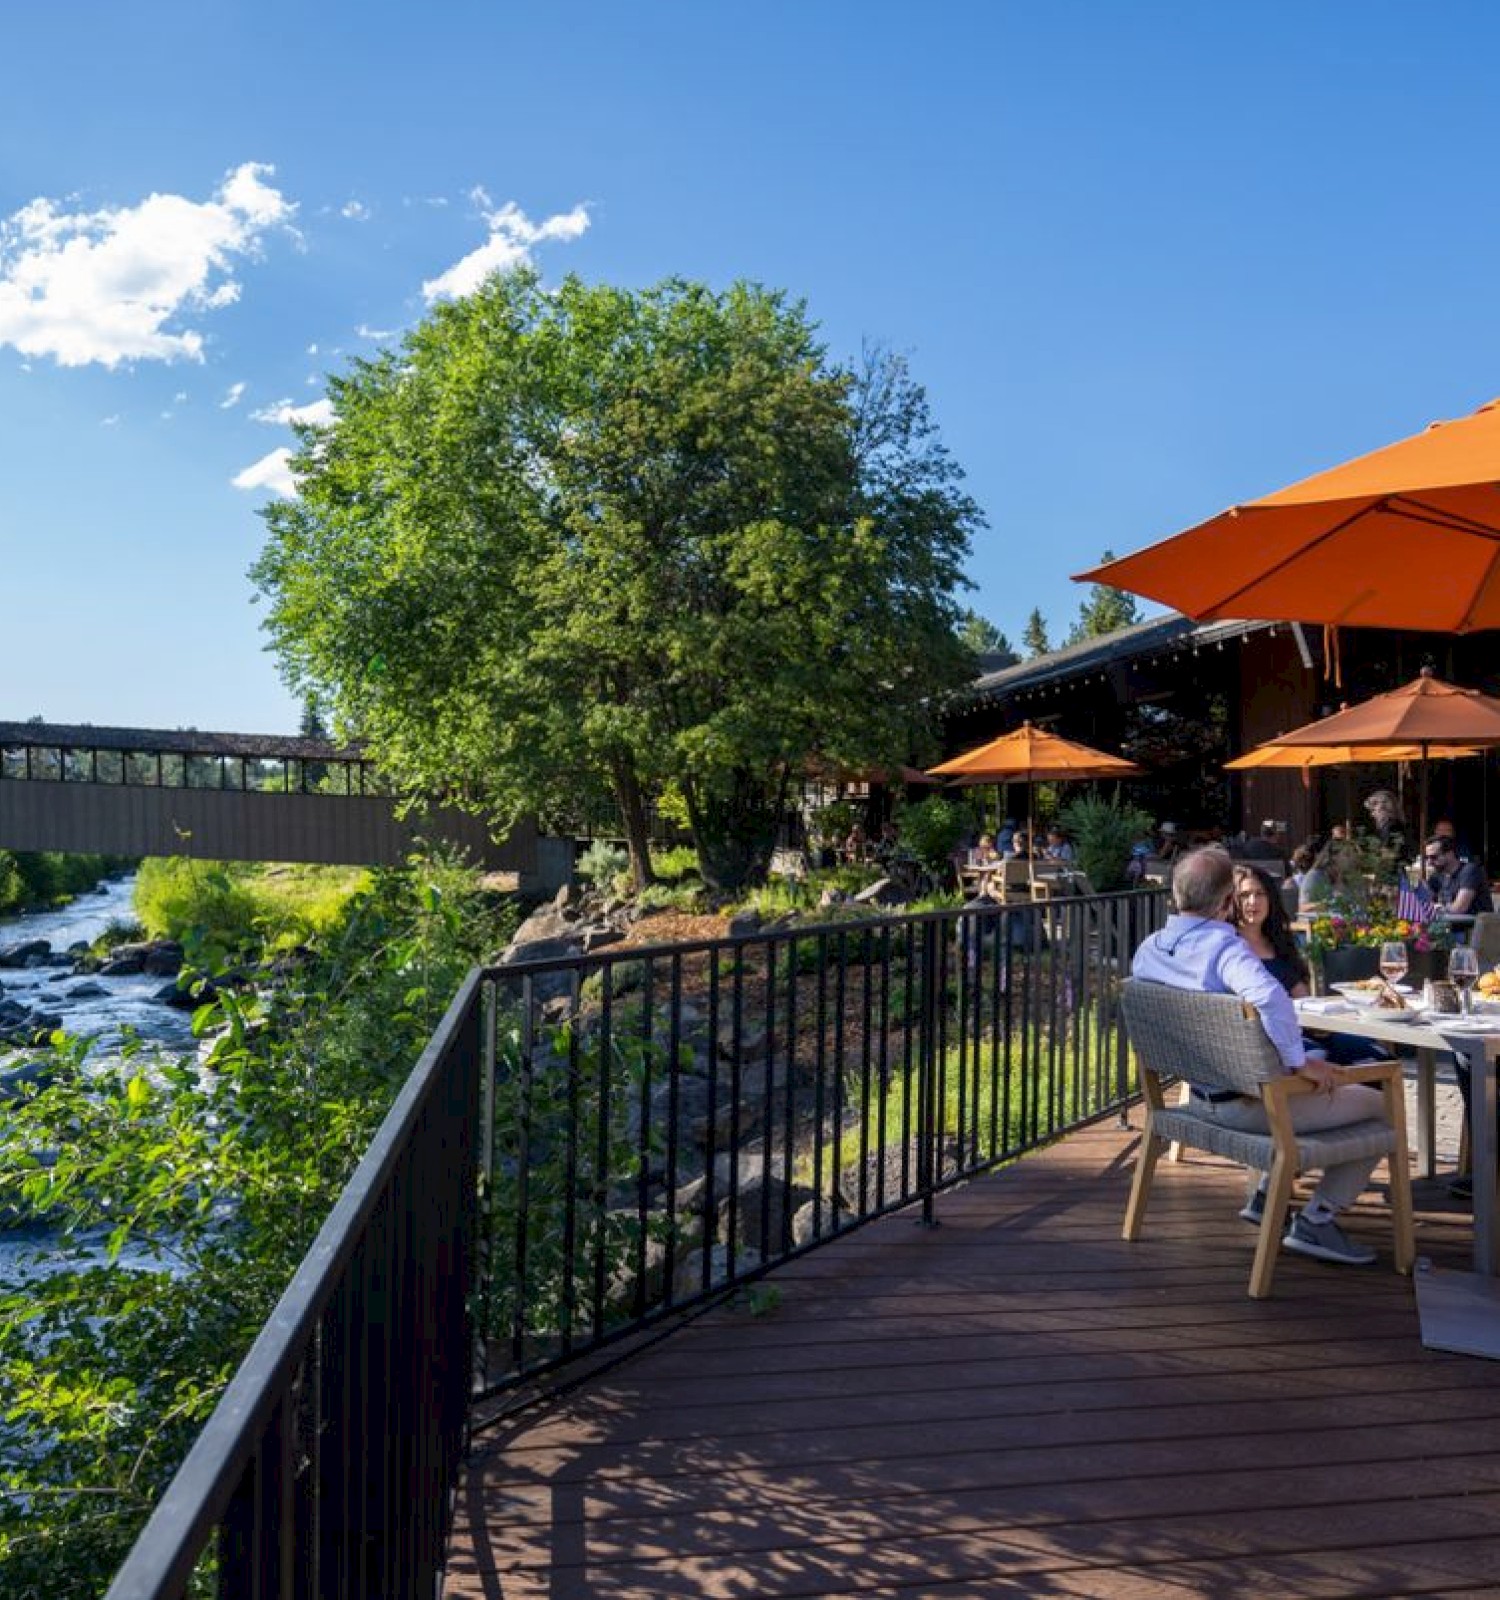 Outdoor dining area by a scenic river with people sitting under orange umbrellas, surrounded by trees and a wooden bridge.